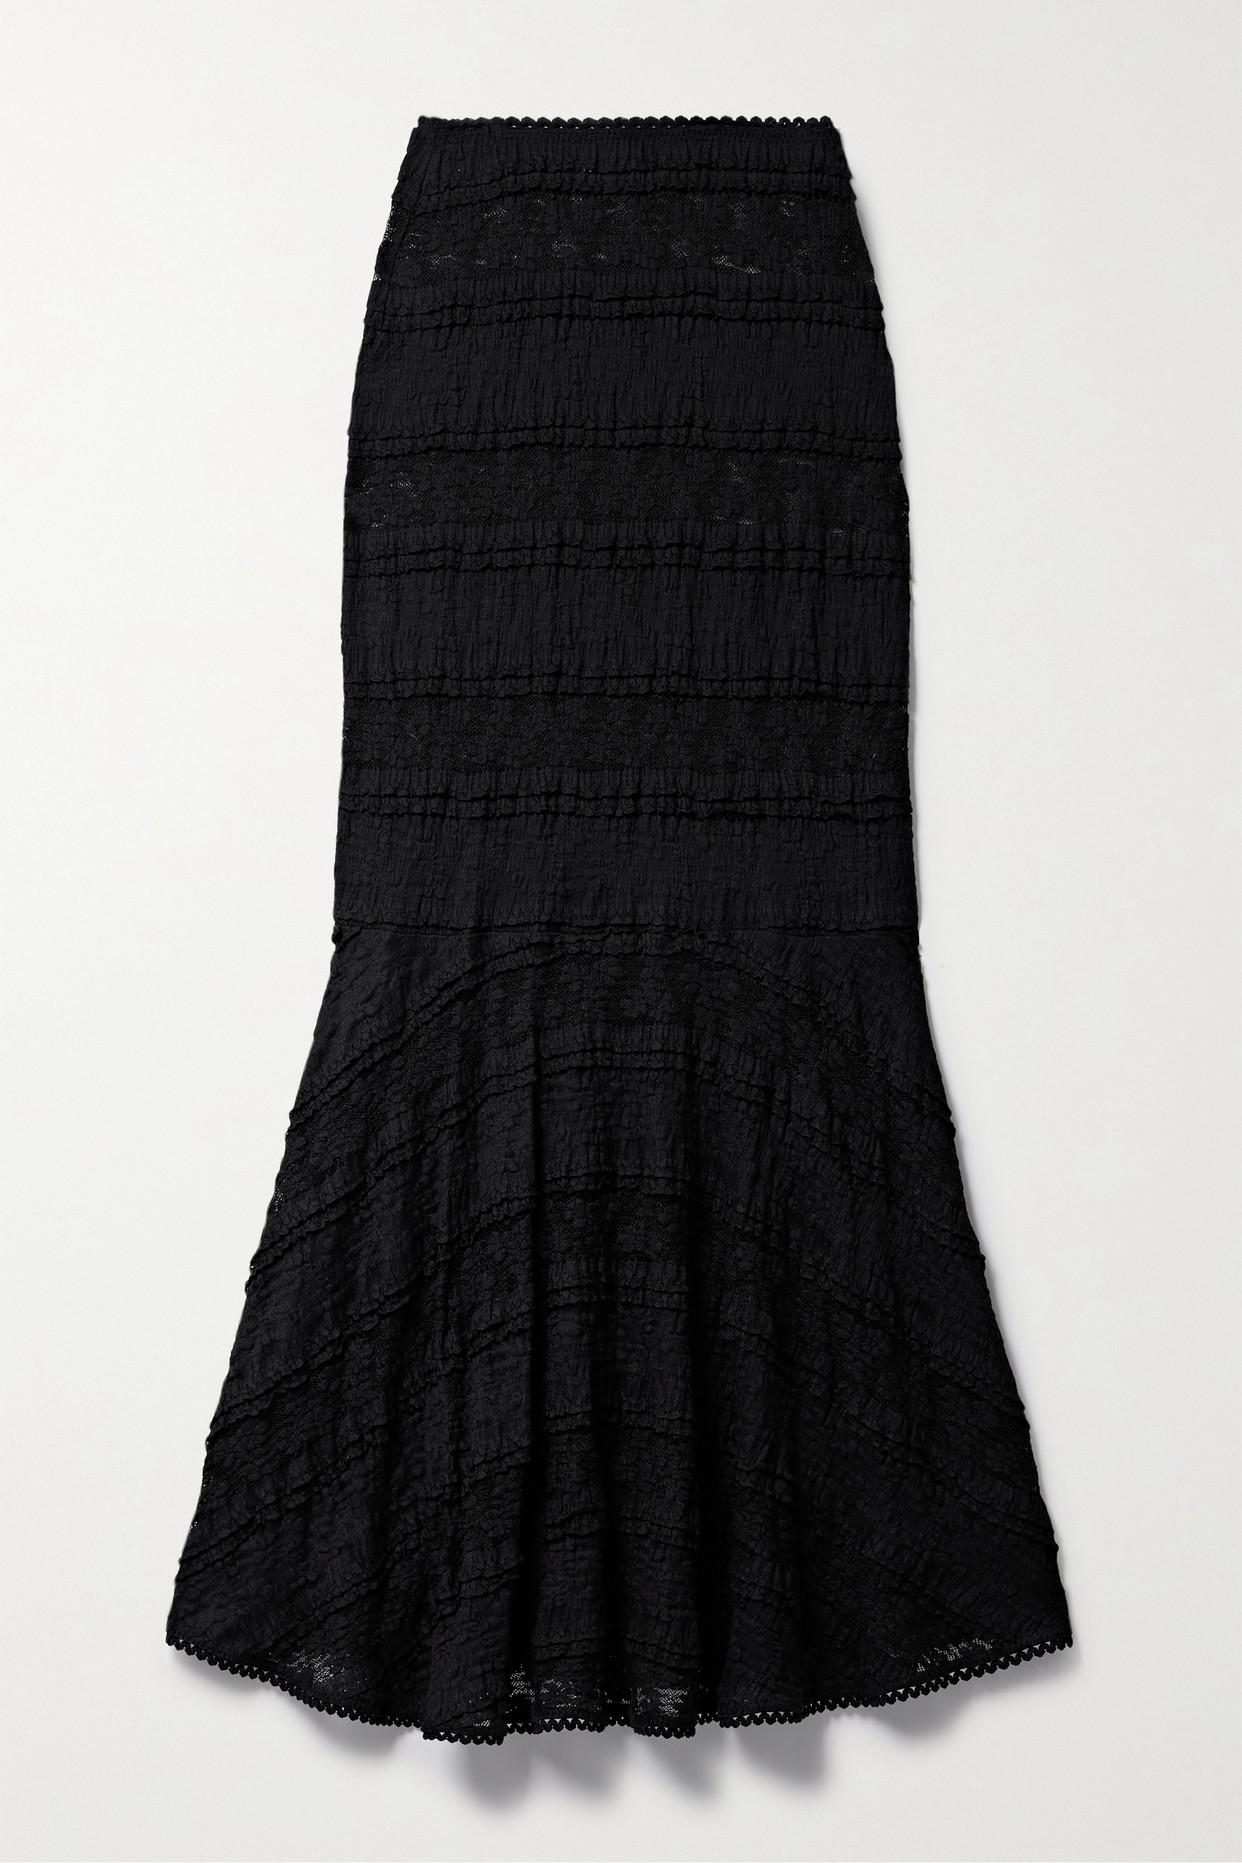 Charo Ruiz Stretch-lace And Gauze Maxi Skirt in Black | Lyst